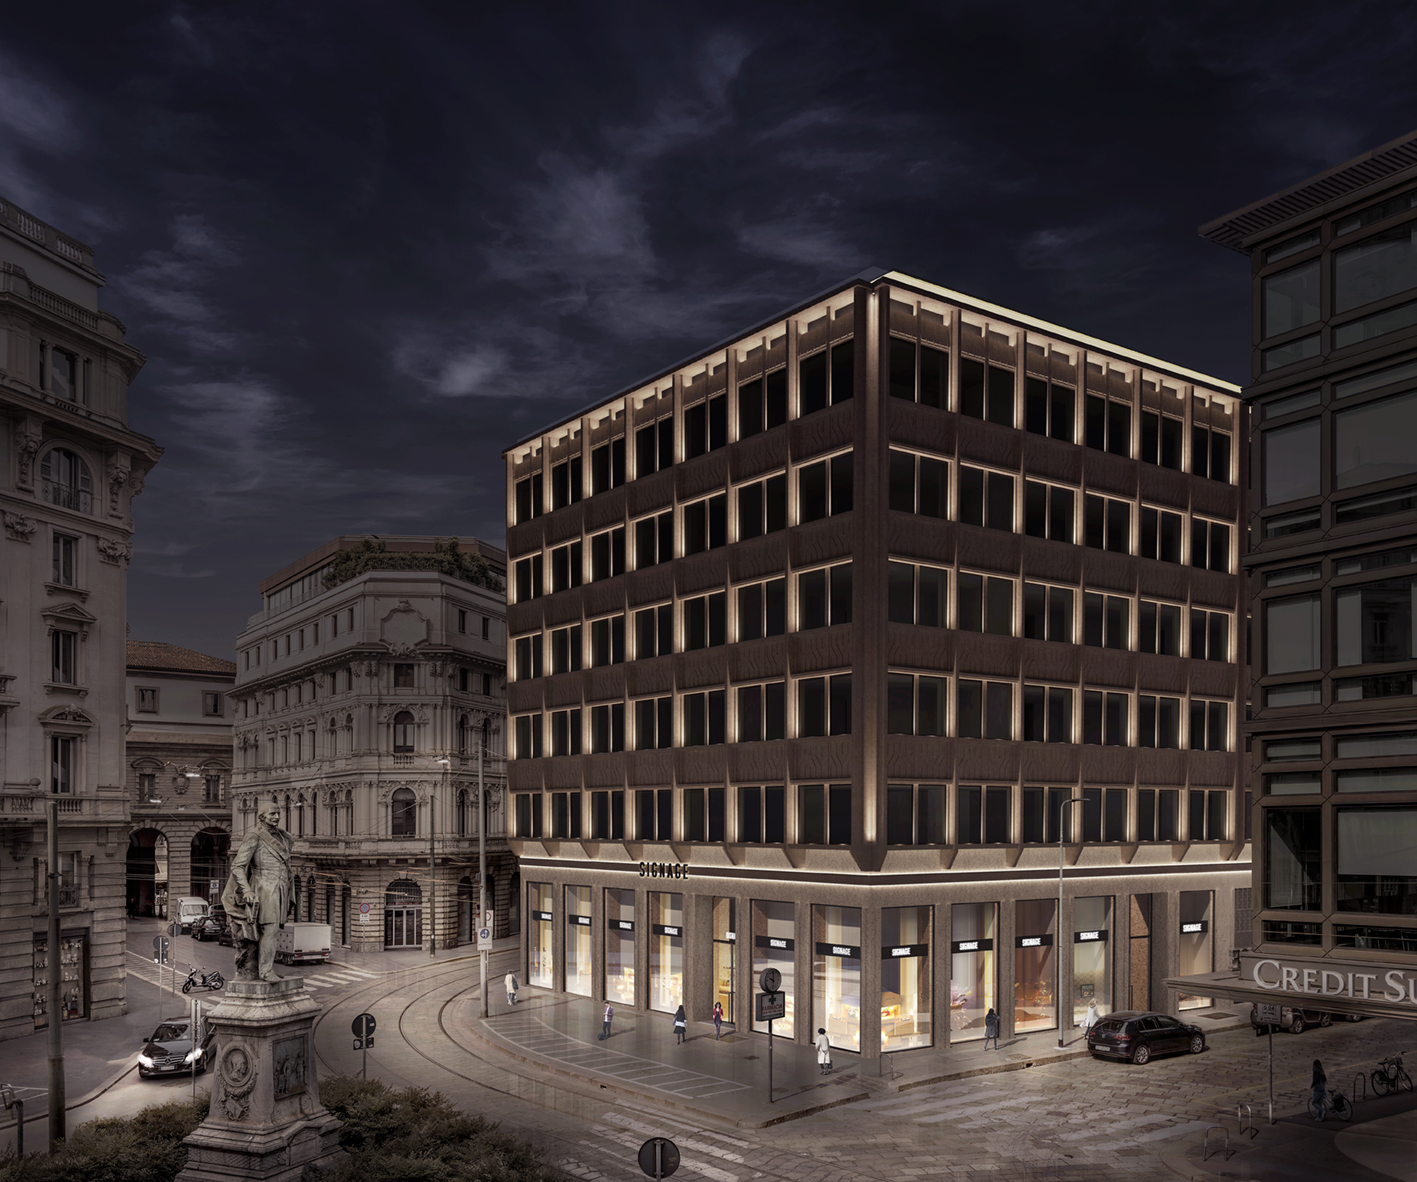 Louis Vuitton opens the new headquarters in Milan in the historic Garage  Traversi